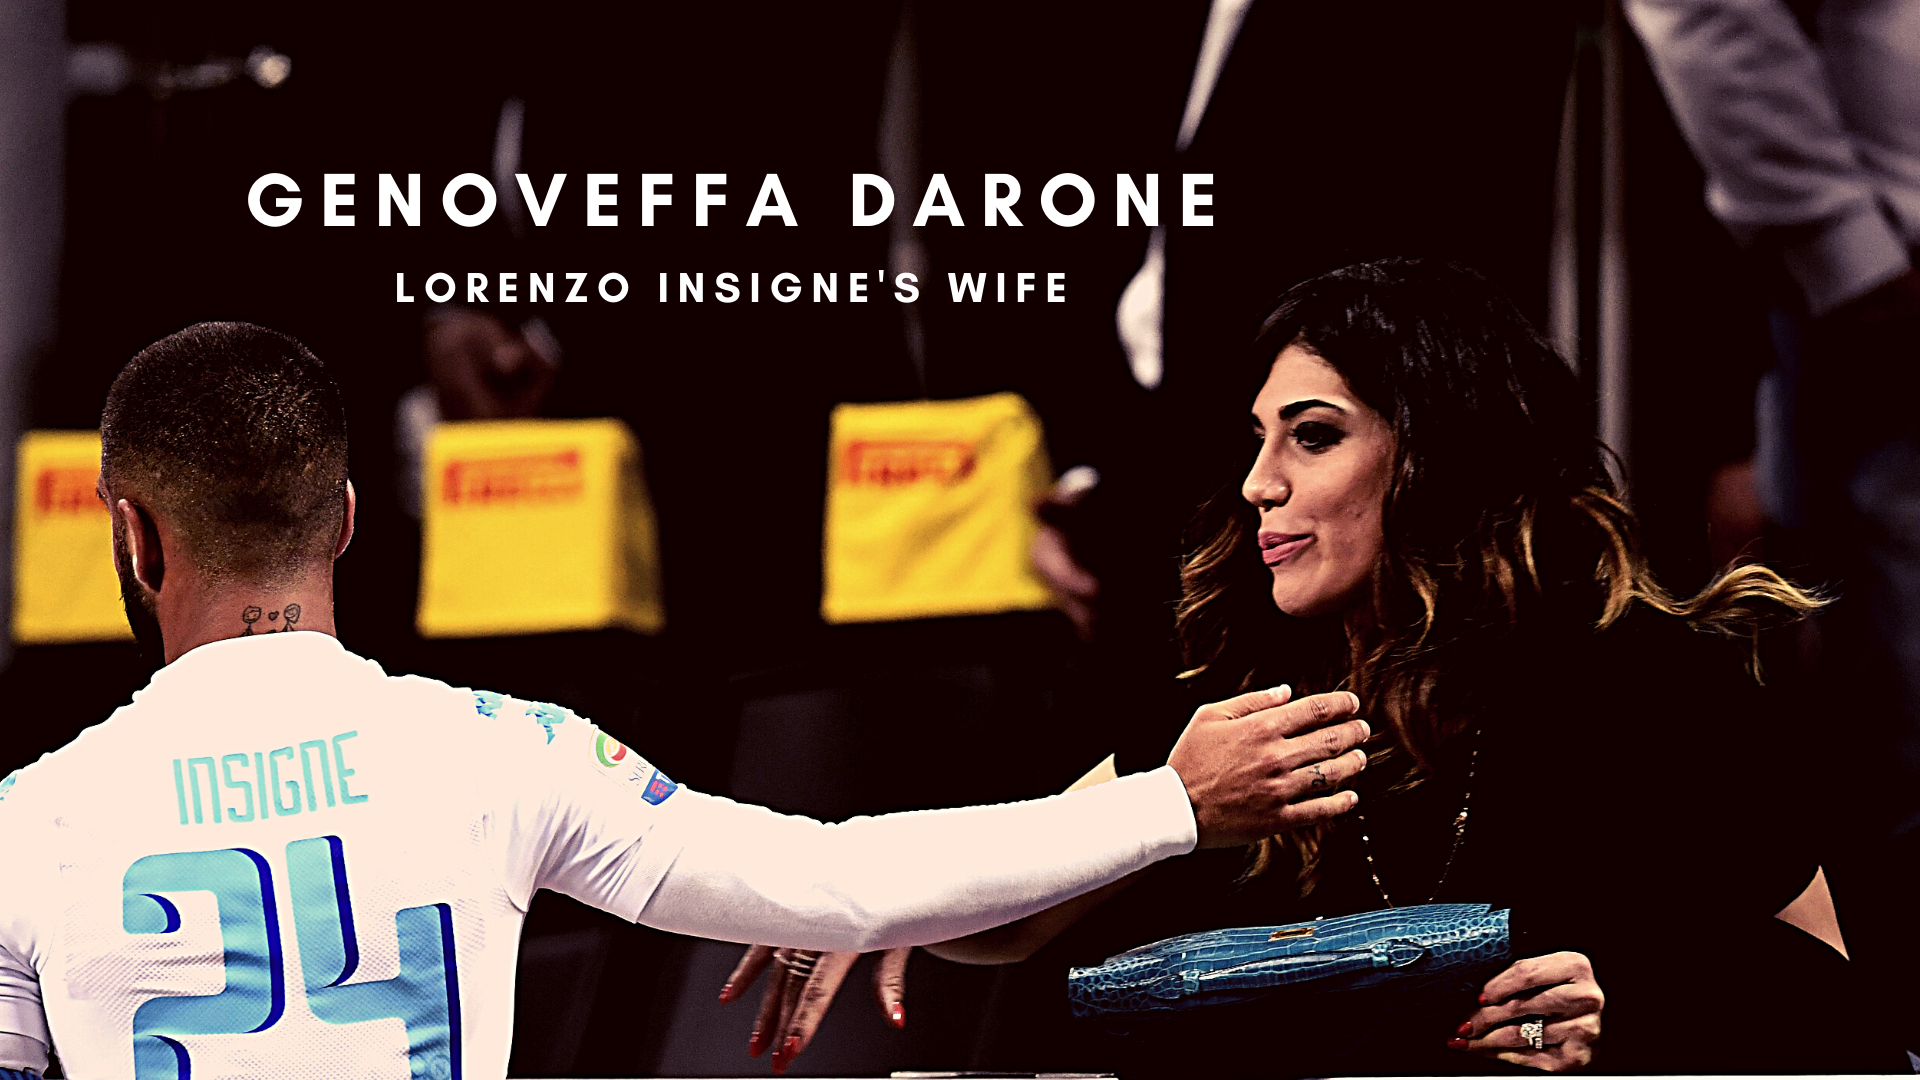 Who Is Genoveffa Darone? Meet the wife of Lorenzo Insigne. (Original Photo MIGUEL MEDINA/AFP via Getty Images)